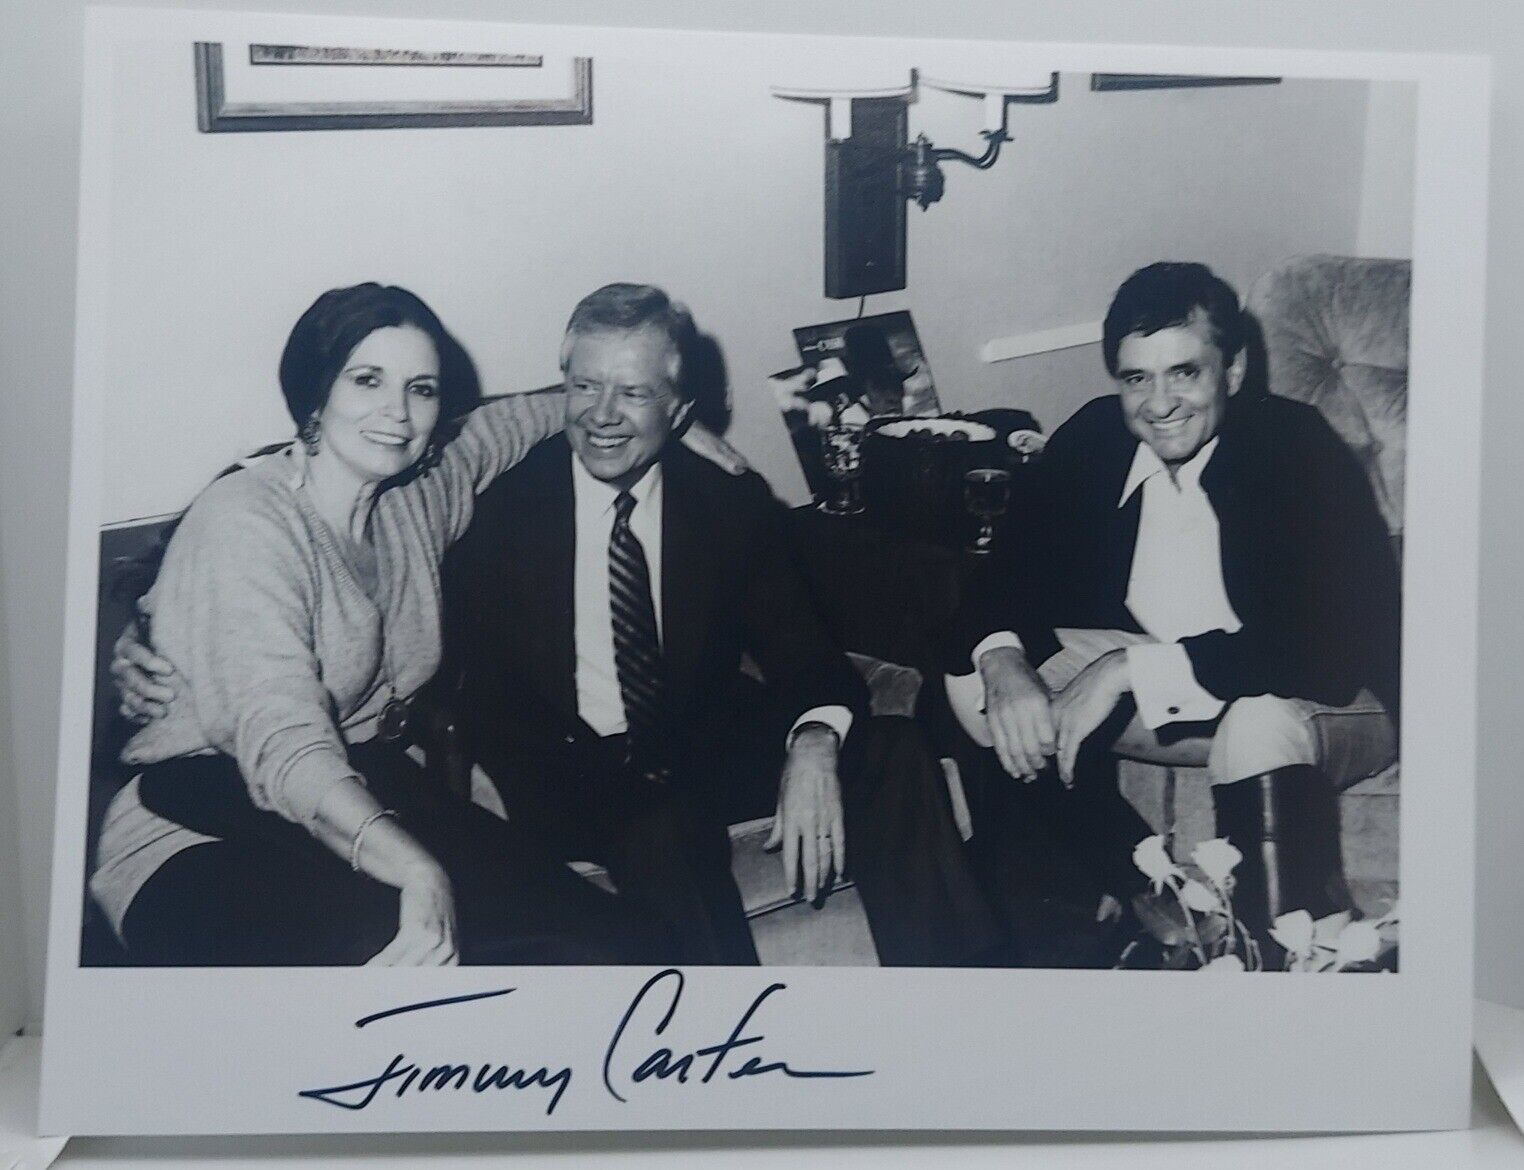 Jimmy Carter Signed 8x10 Photo Autographed Full Signature W/ Johnny Cash & June